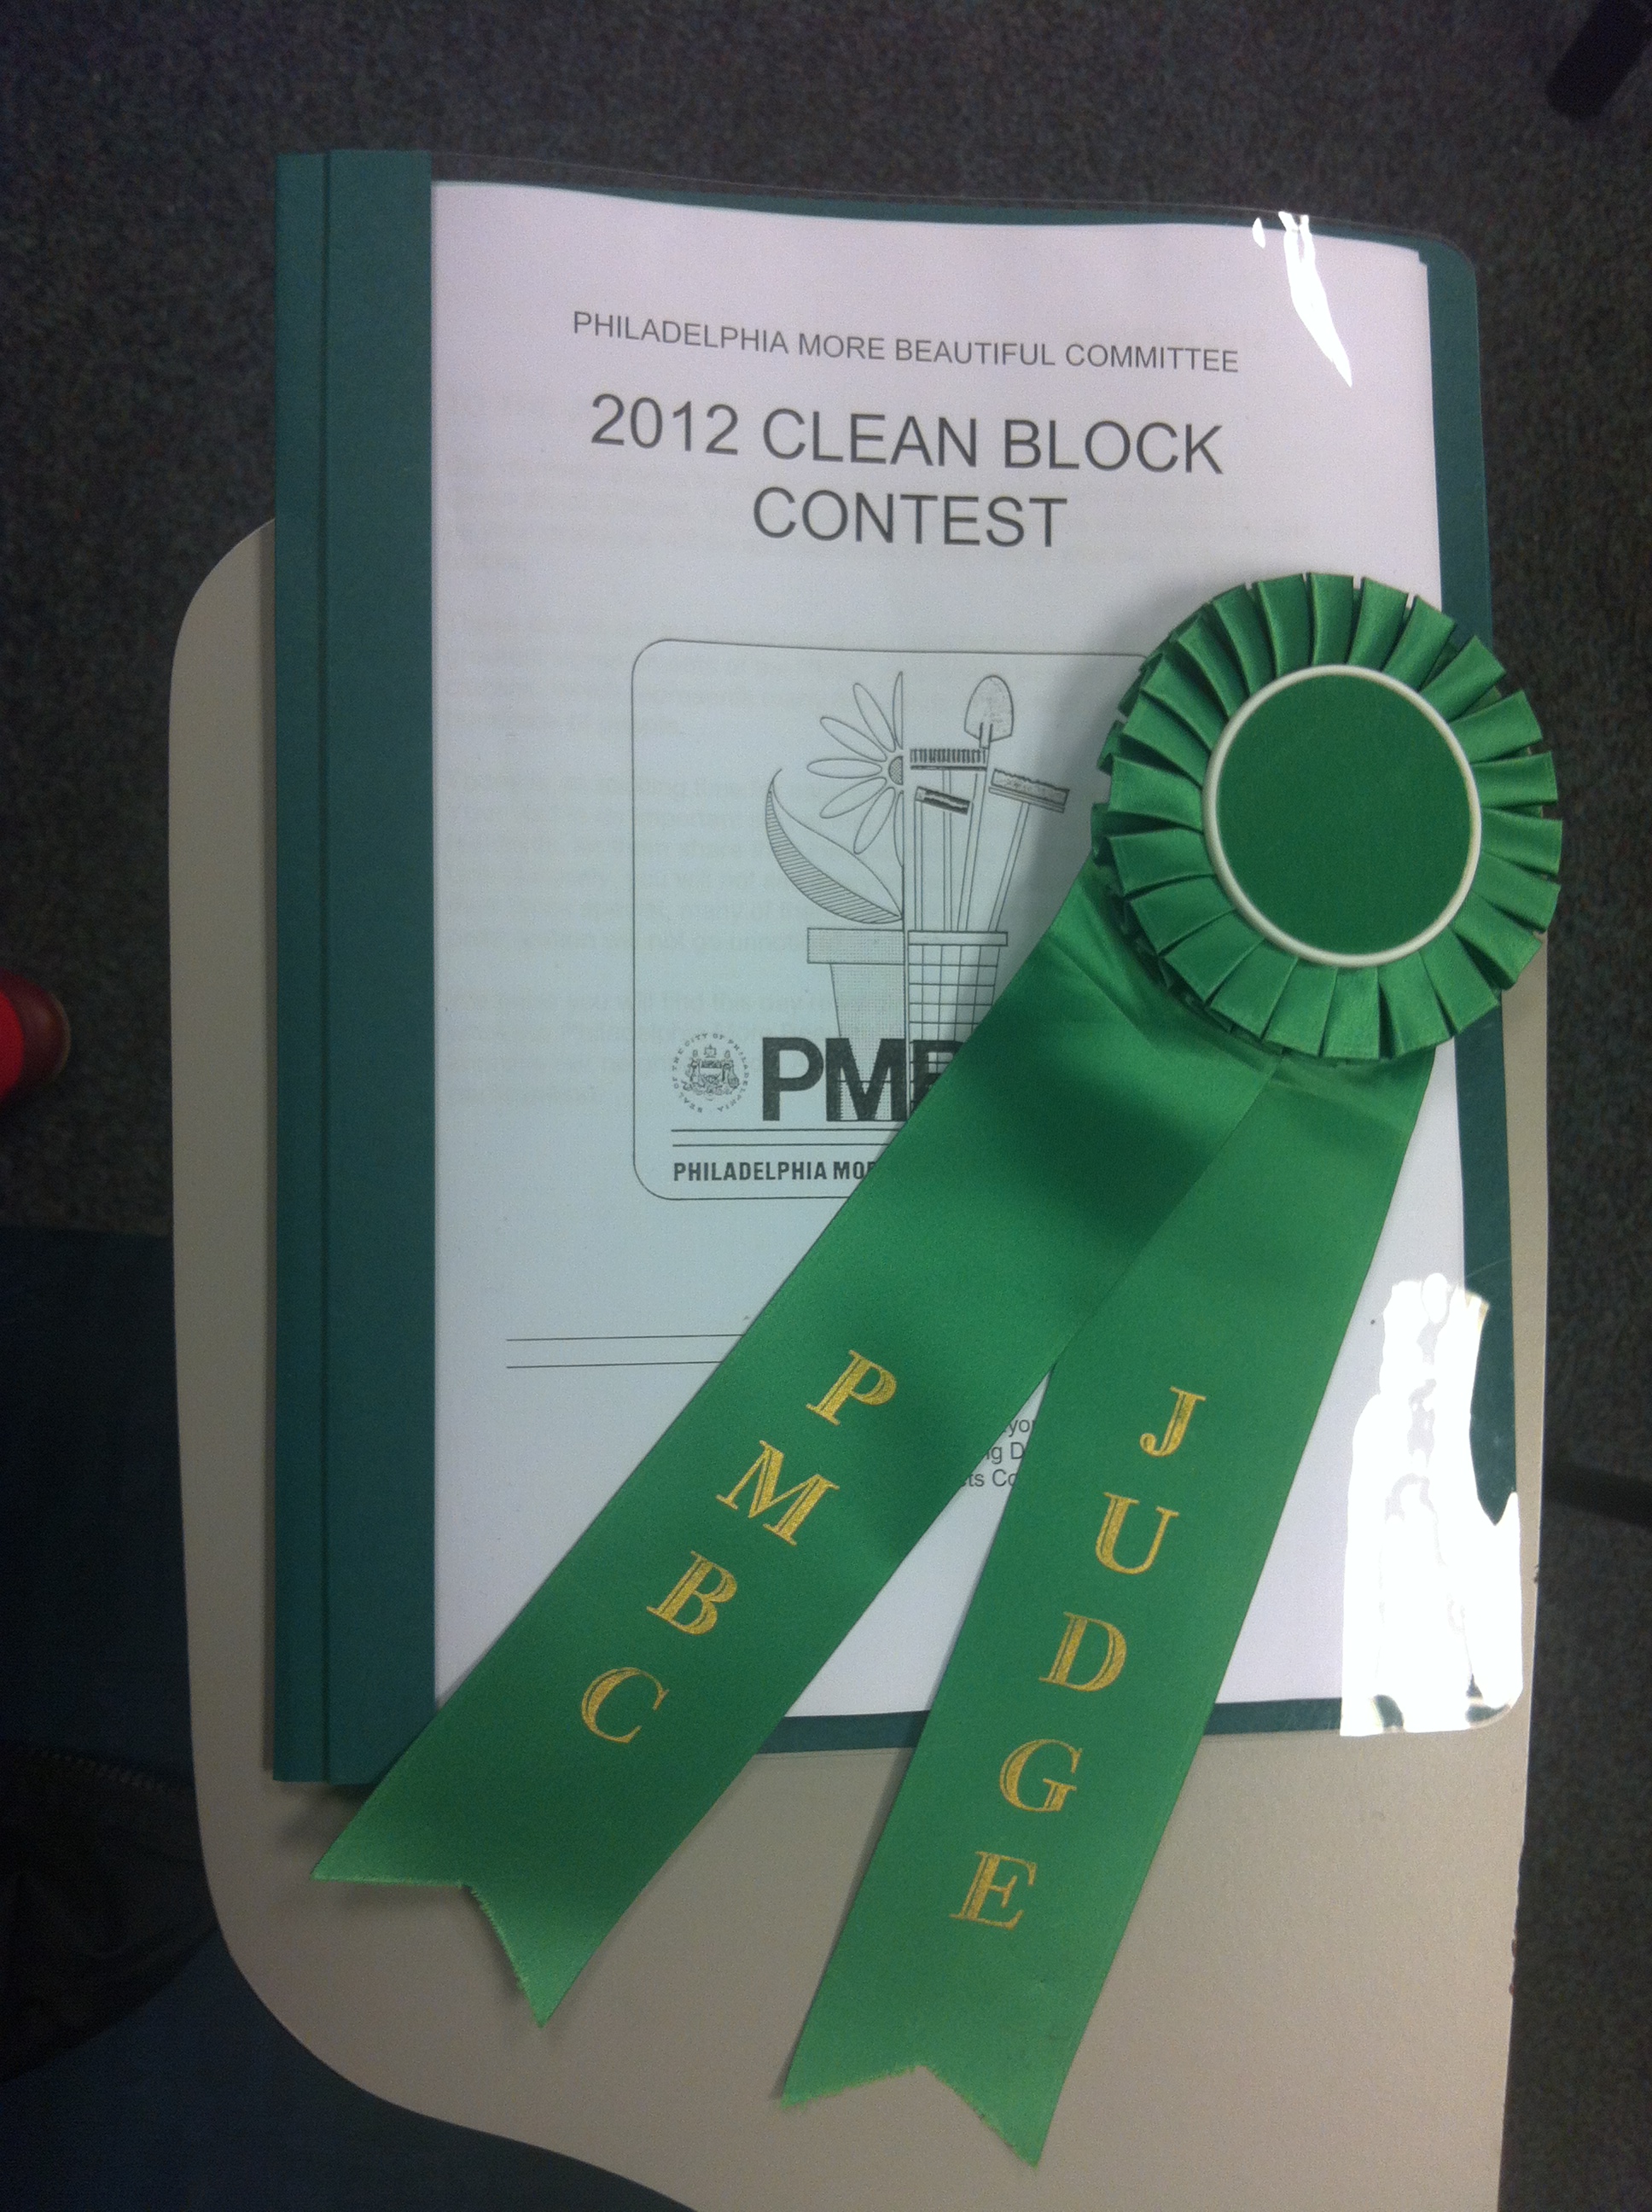 All judges wear a ribbon and receive a detailed judging packet with a history of the contest as well as guidelines for issuing fair scores at each block.